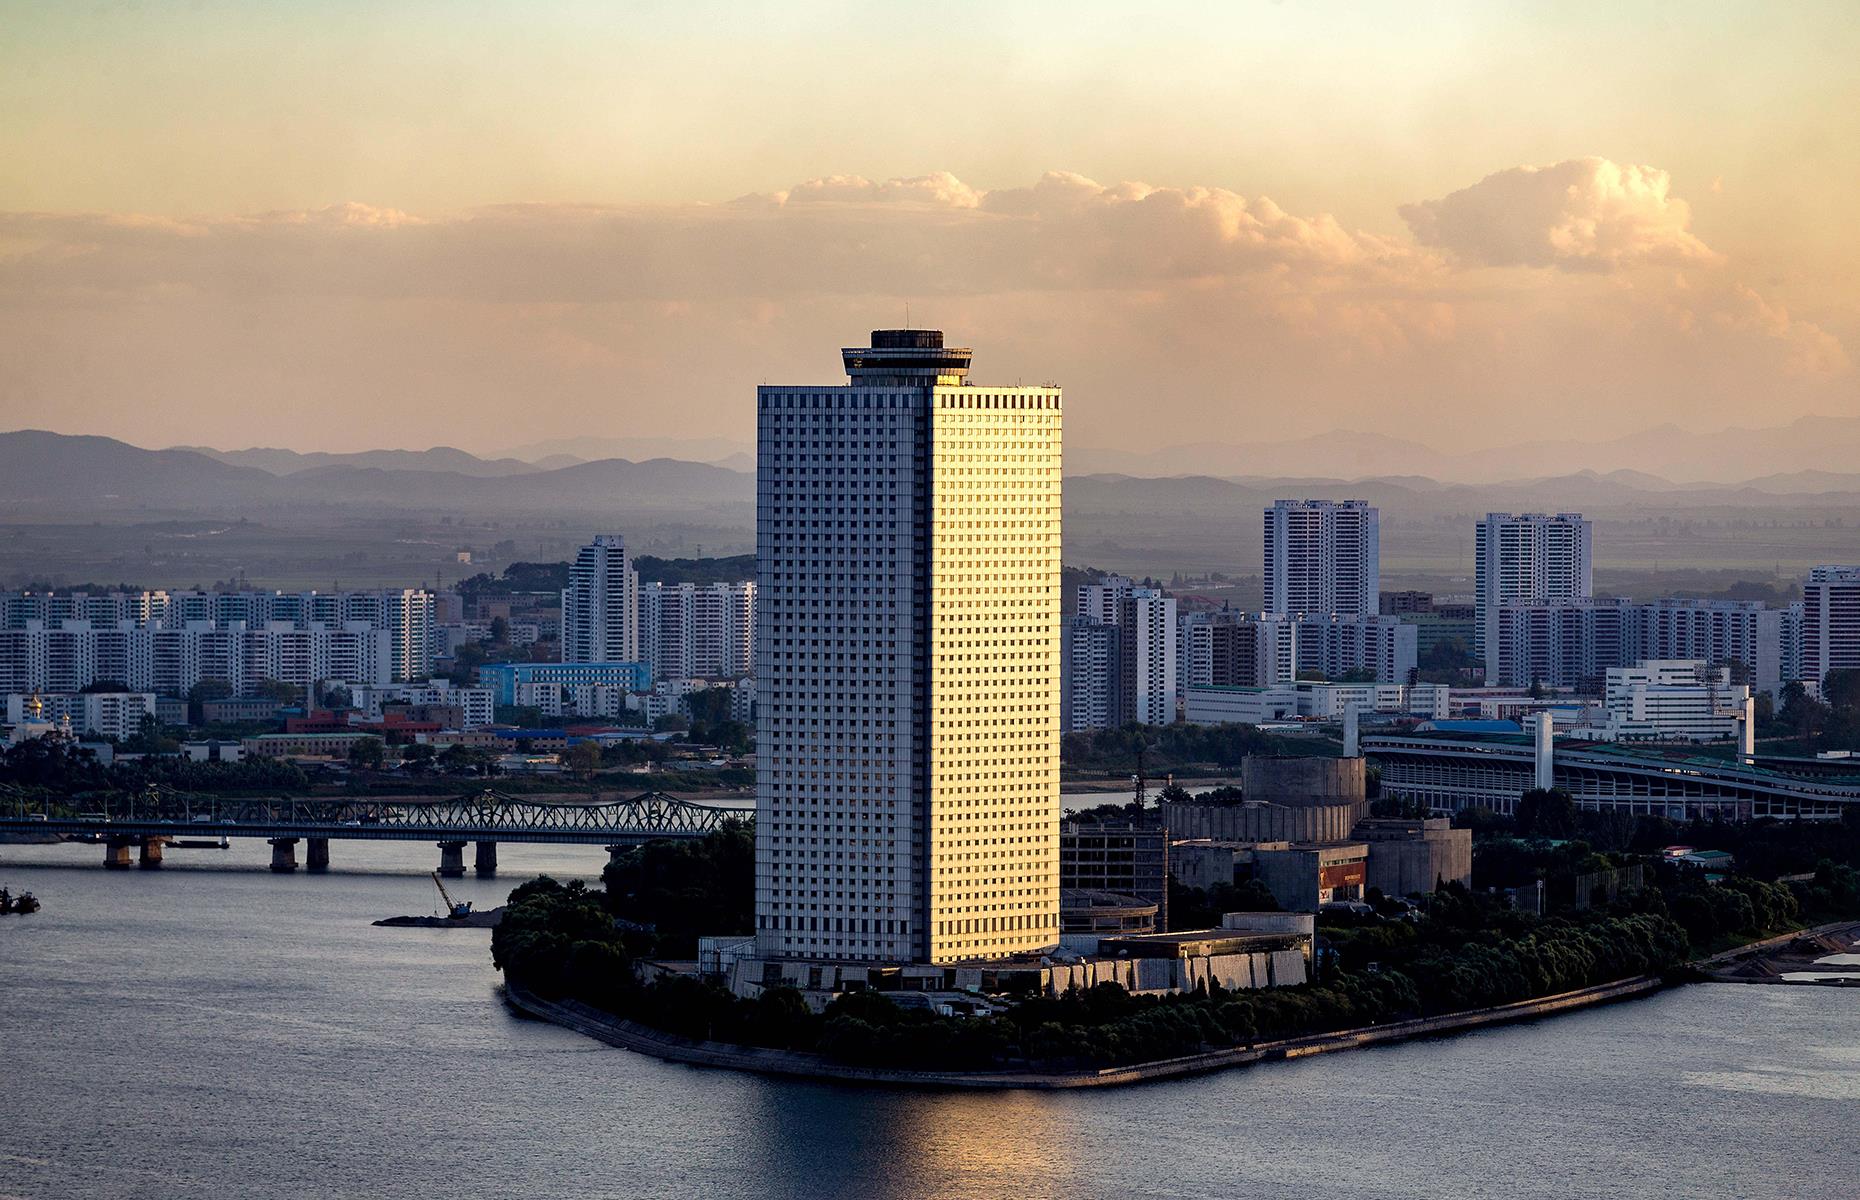 <p>Despite North Korea's aversion to foreigners, the hermit state has hosted a steady trickle of organized tours over the years, so there are already several functional hotels in the capital. The Yanggakdo International Hotel (pictured) is the largest, set on an island in the Taedong River, while the Ryanggang Hotel is generally considered the fanciest – that is until the Ryugyong finally opens.</p>  <p><a href="https://www.loveexploring.com/galleries/188339/the-worlds-biggest-abandoned-beach-town-has-controversially-reopened-to-to?page=1"><strong>The incredible story of Varosha, the world's biggest abandoned beach town</strong></a></p>